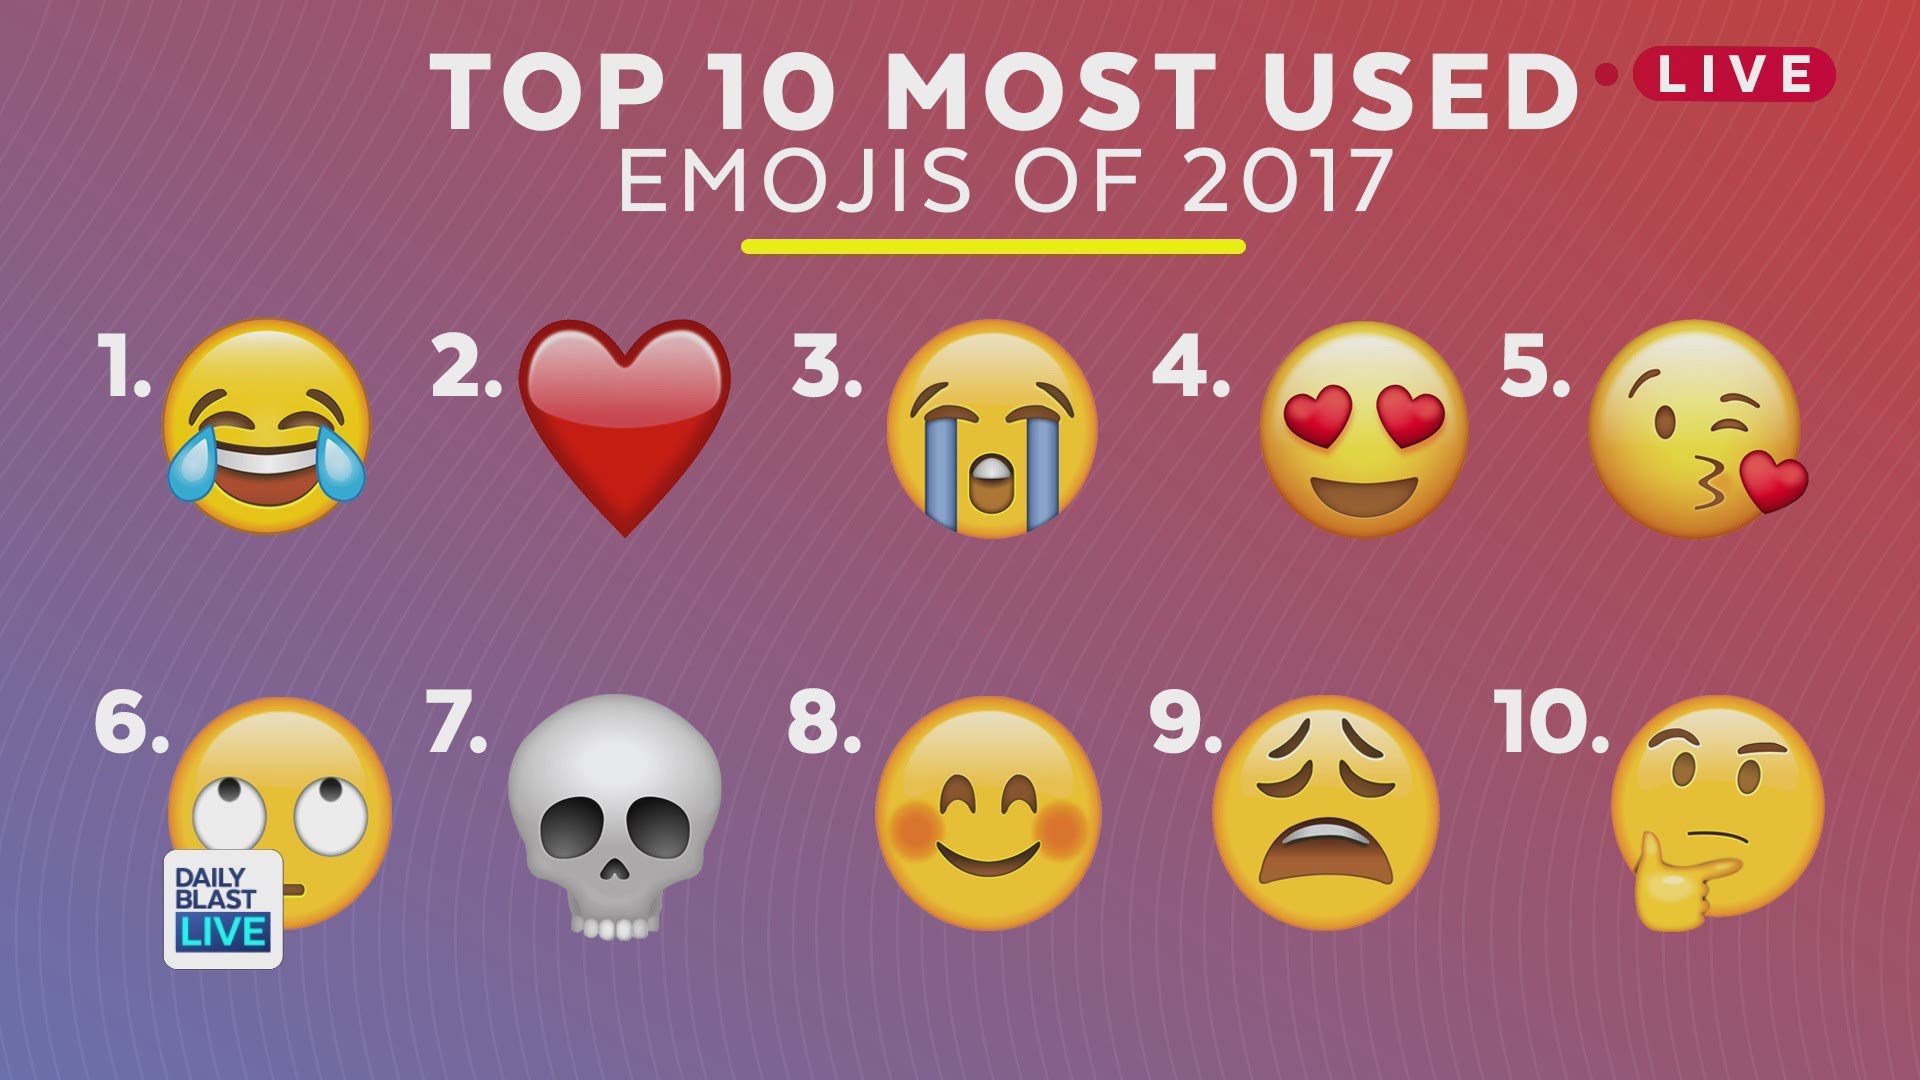 The top used emojis for 2017 have been announced. We decided to have some emoji fun at the Daily Blast LIVE studio. Which emoji did you use the most this year? 